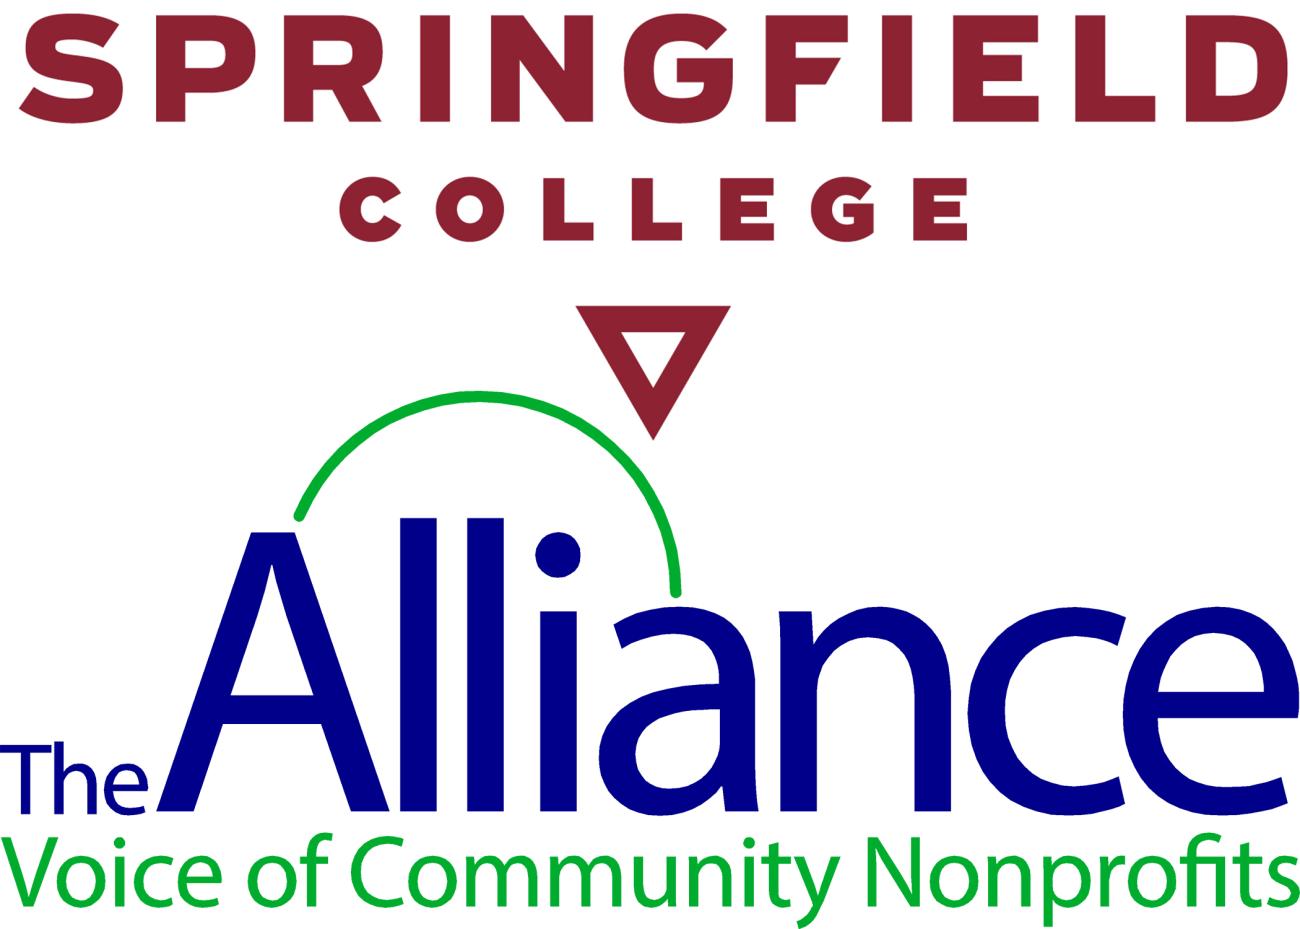 Springfield College has partnered with the Connecticut Community Nonprofit Alliance in providing employee grants to full and part-time employees of the Connecticut Community Nonprofit Alliance, who are enrolled in either undergraduate, graduate, doctoral, or certificate of advanced graduate study programs at Springfield College.  